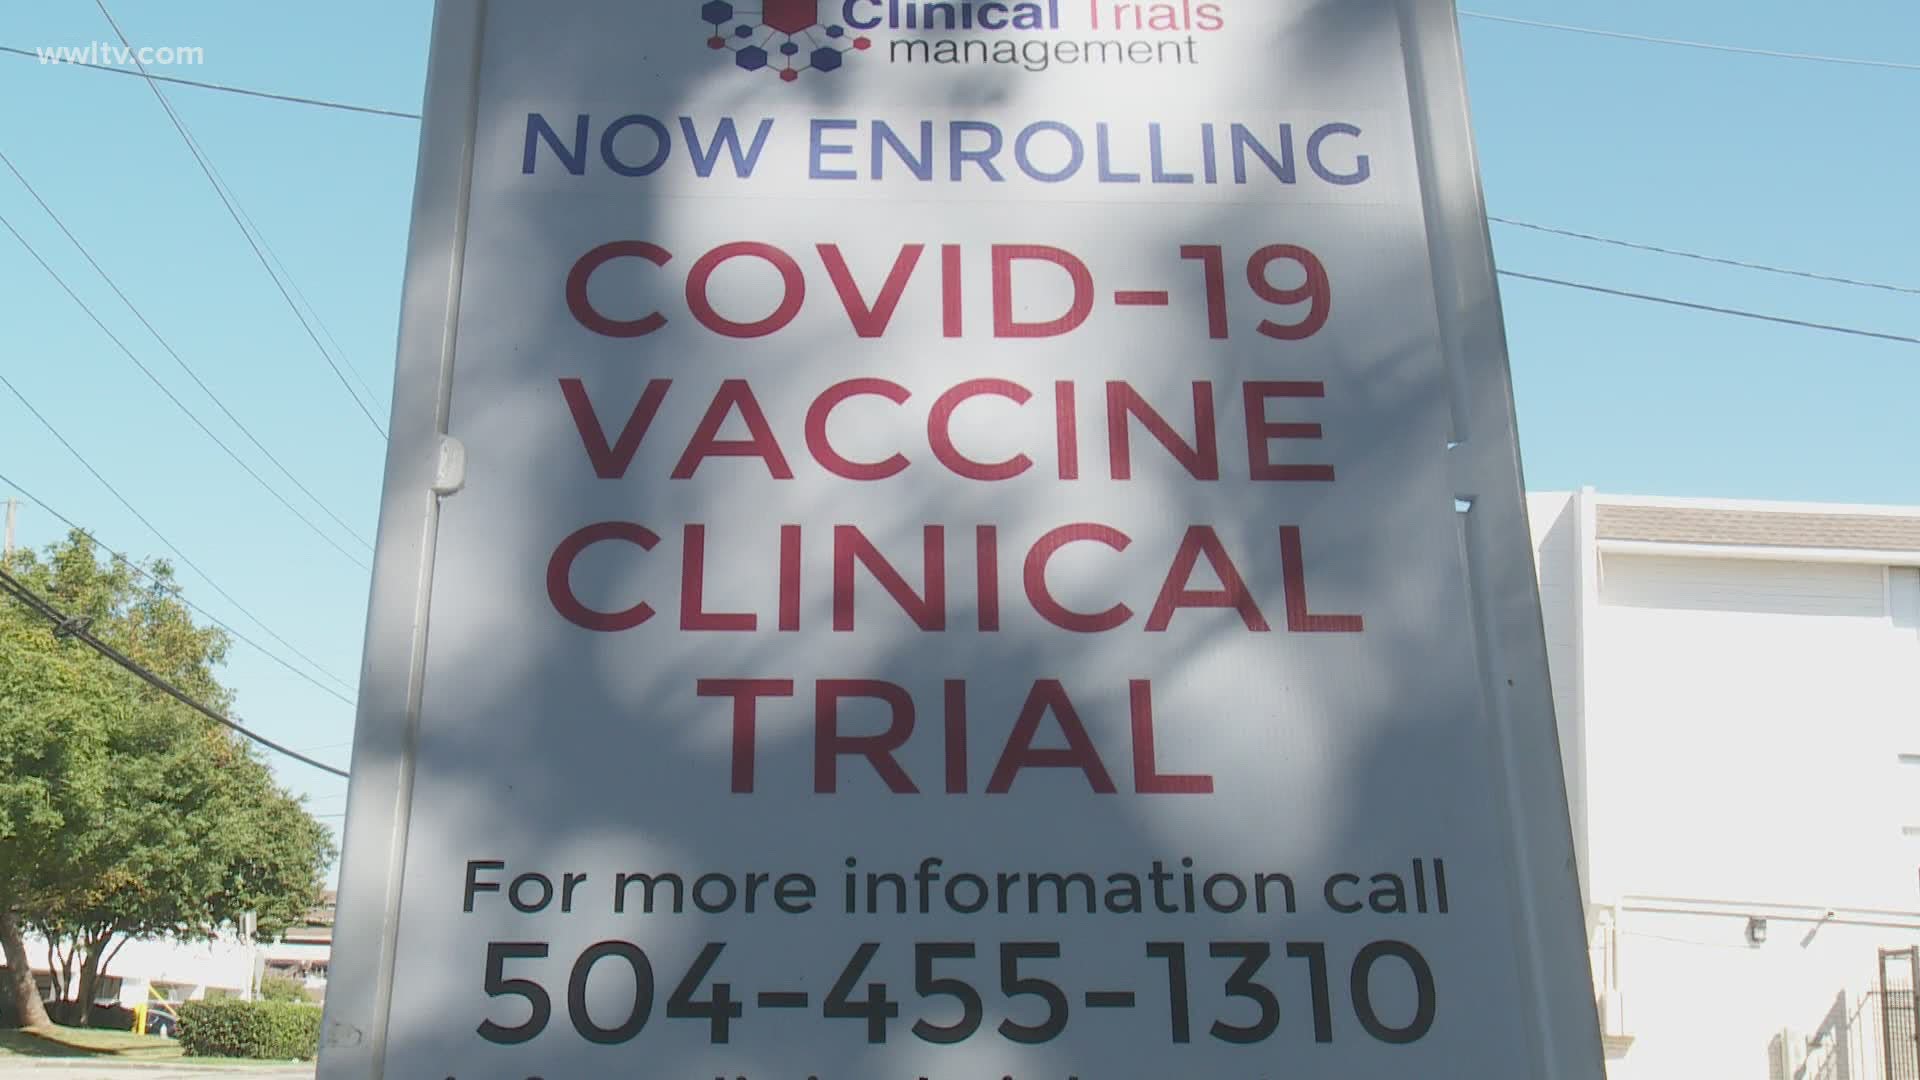 Erica Woodley is one of 150 people signed up for the trial to test the Coronavirus vaccine.